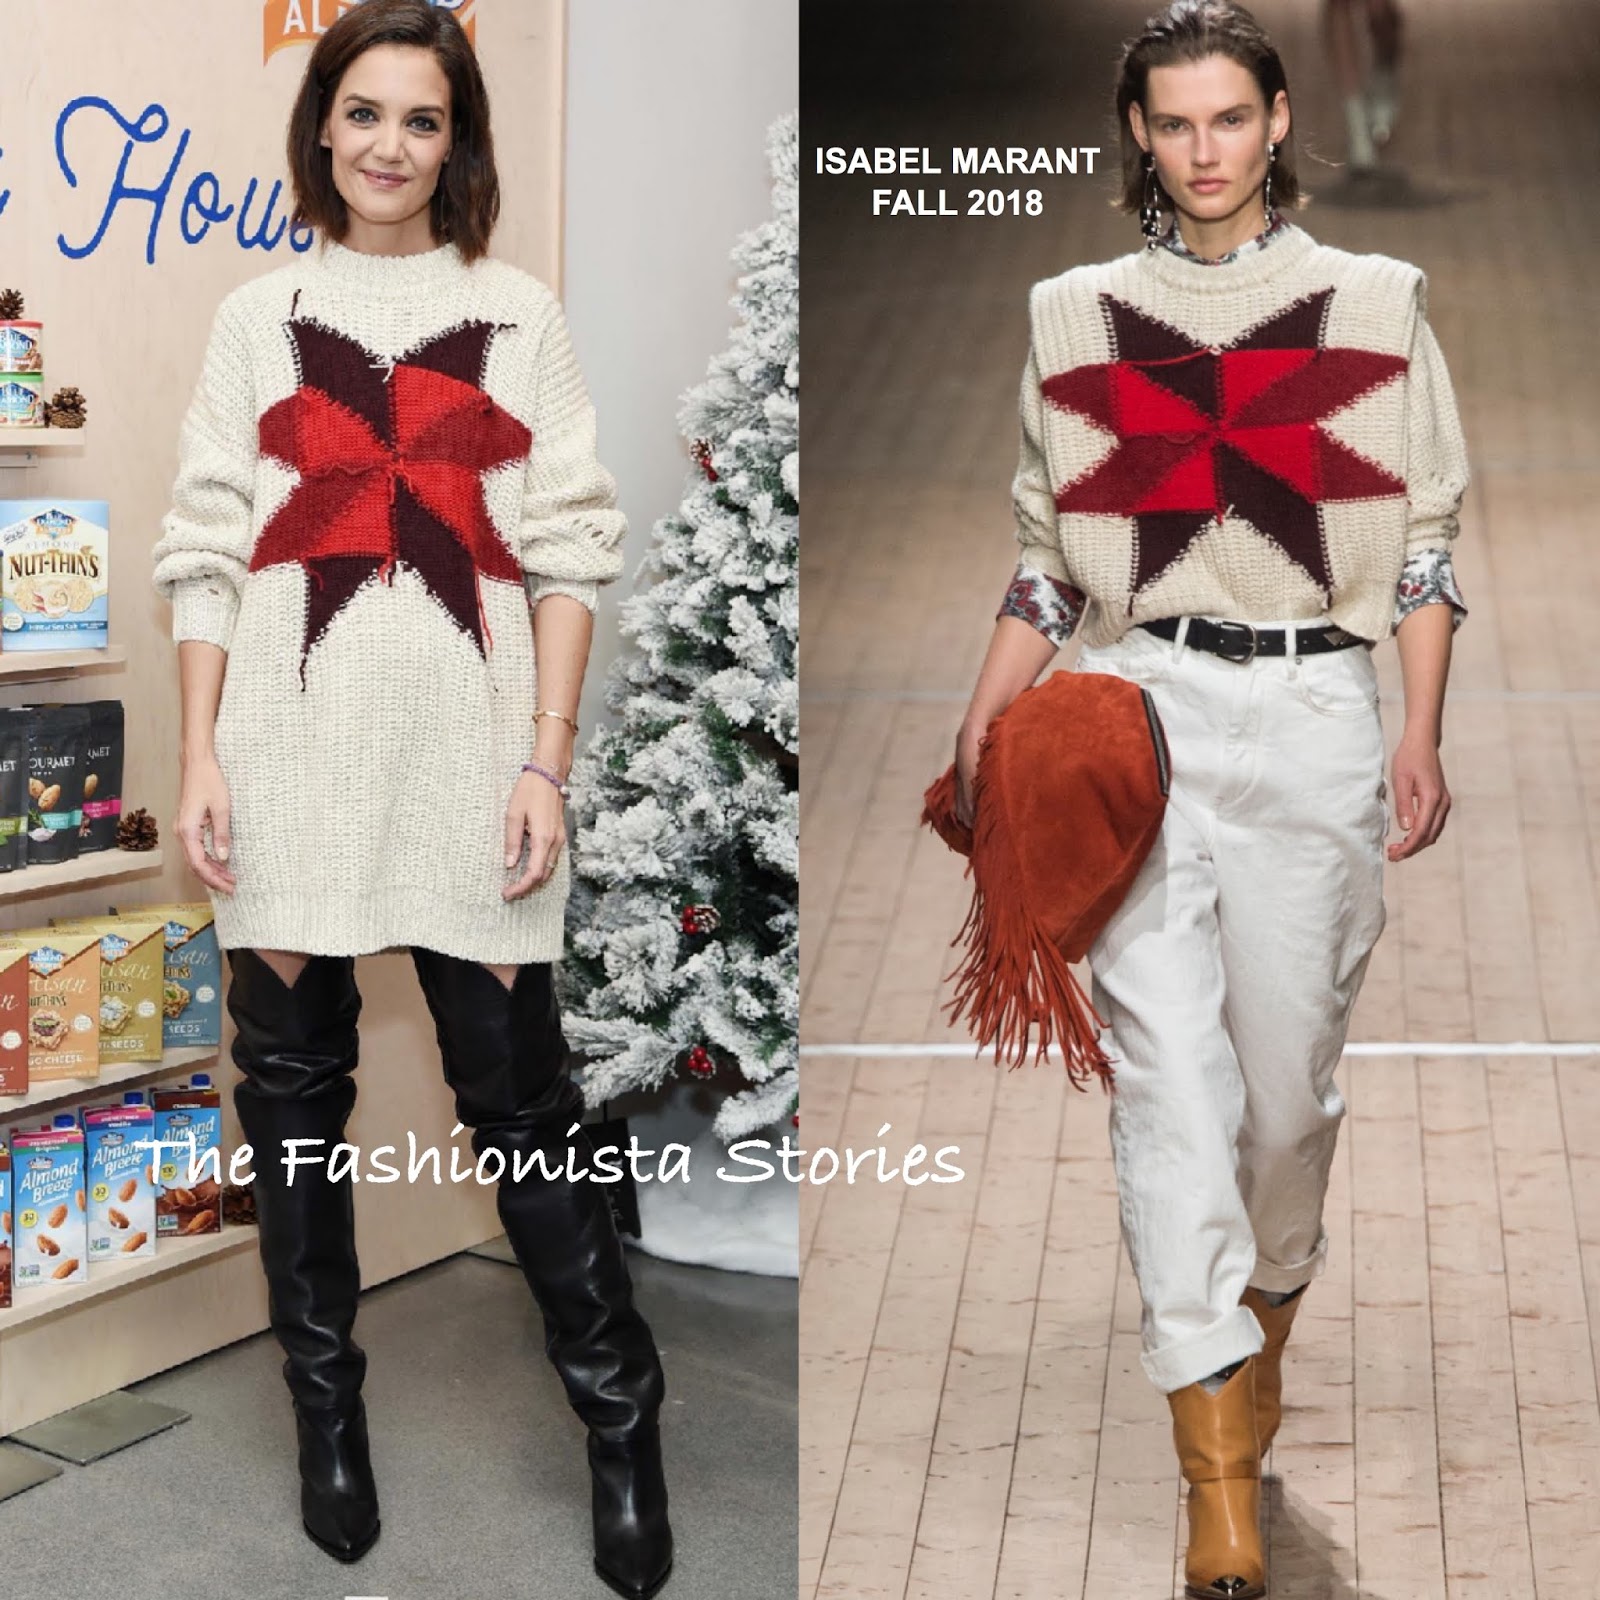 Katie Holmes in Isabel Marant at the Blue Diamond Almonds House